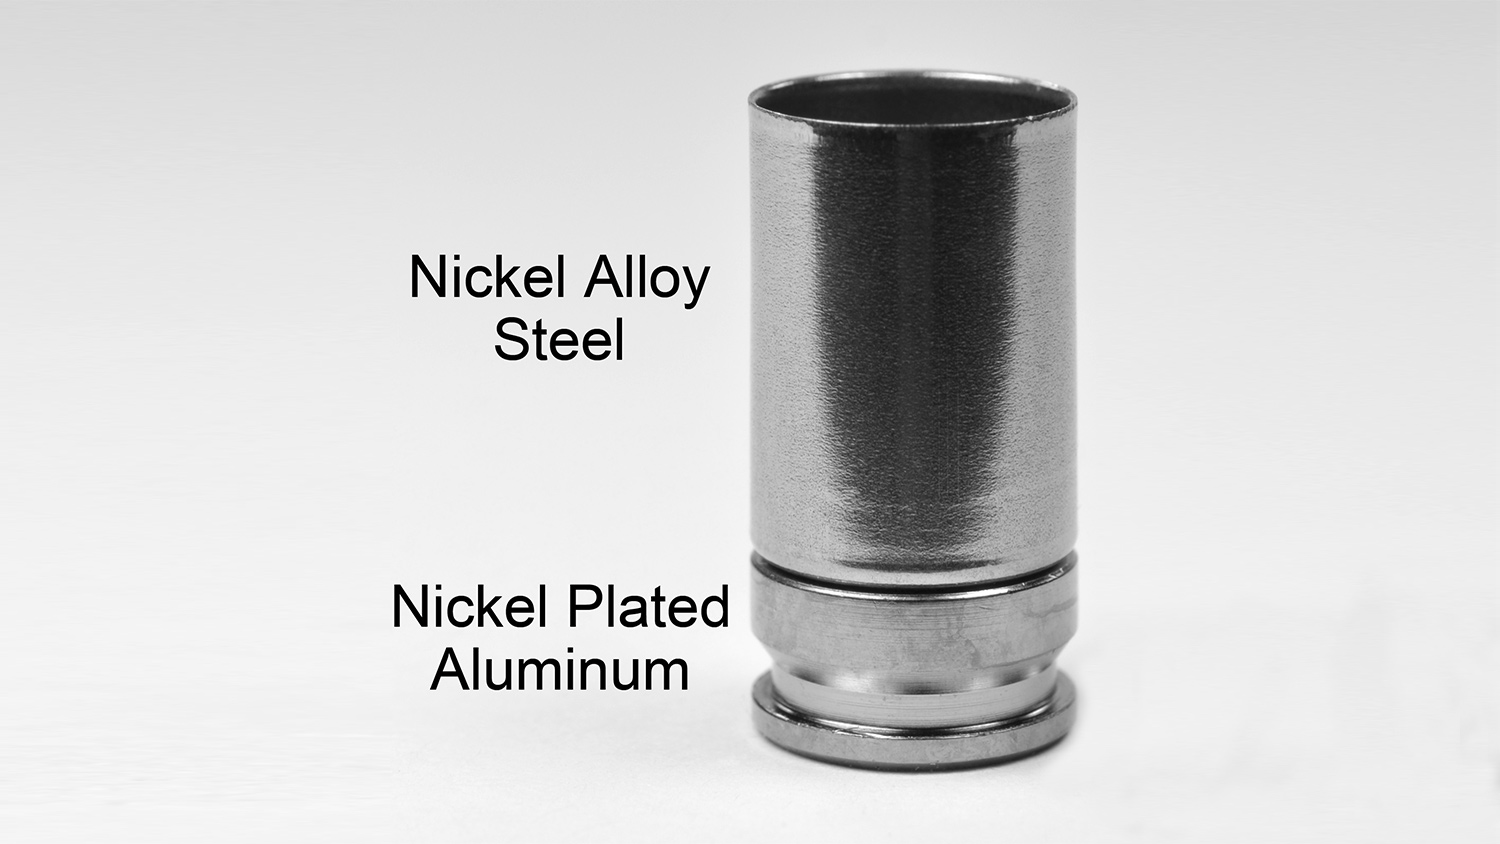 Figure 1. Shell Shock Technologies’ new cases are made from two separate components, one nickel alloy steel and the other aluminum